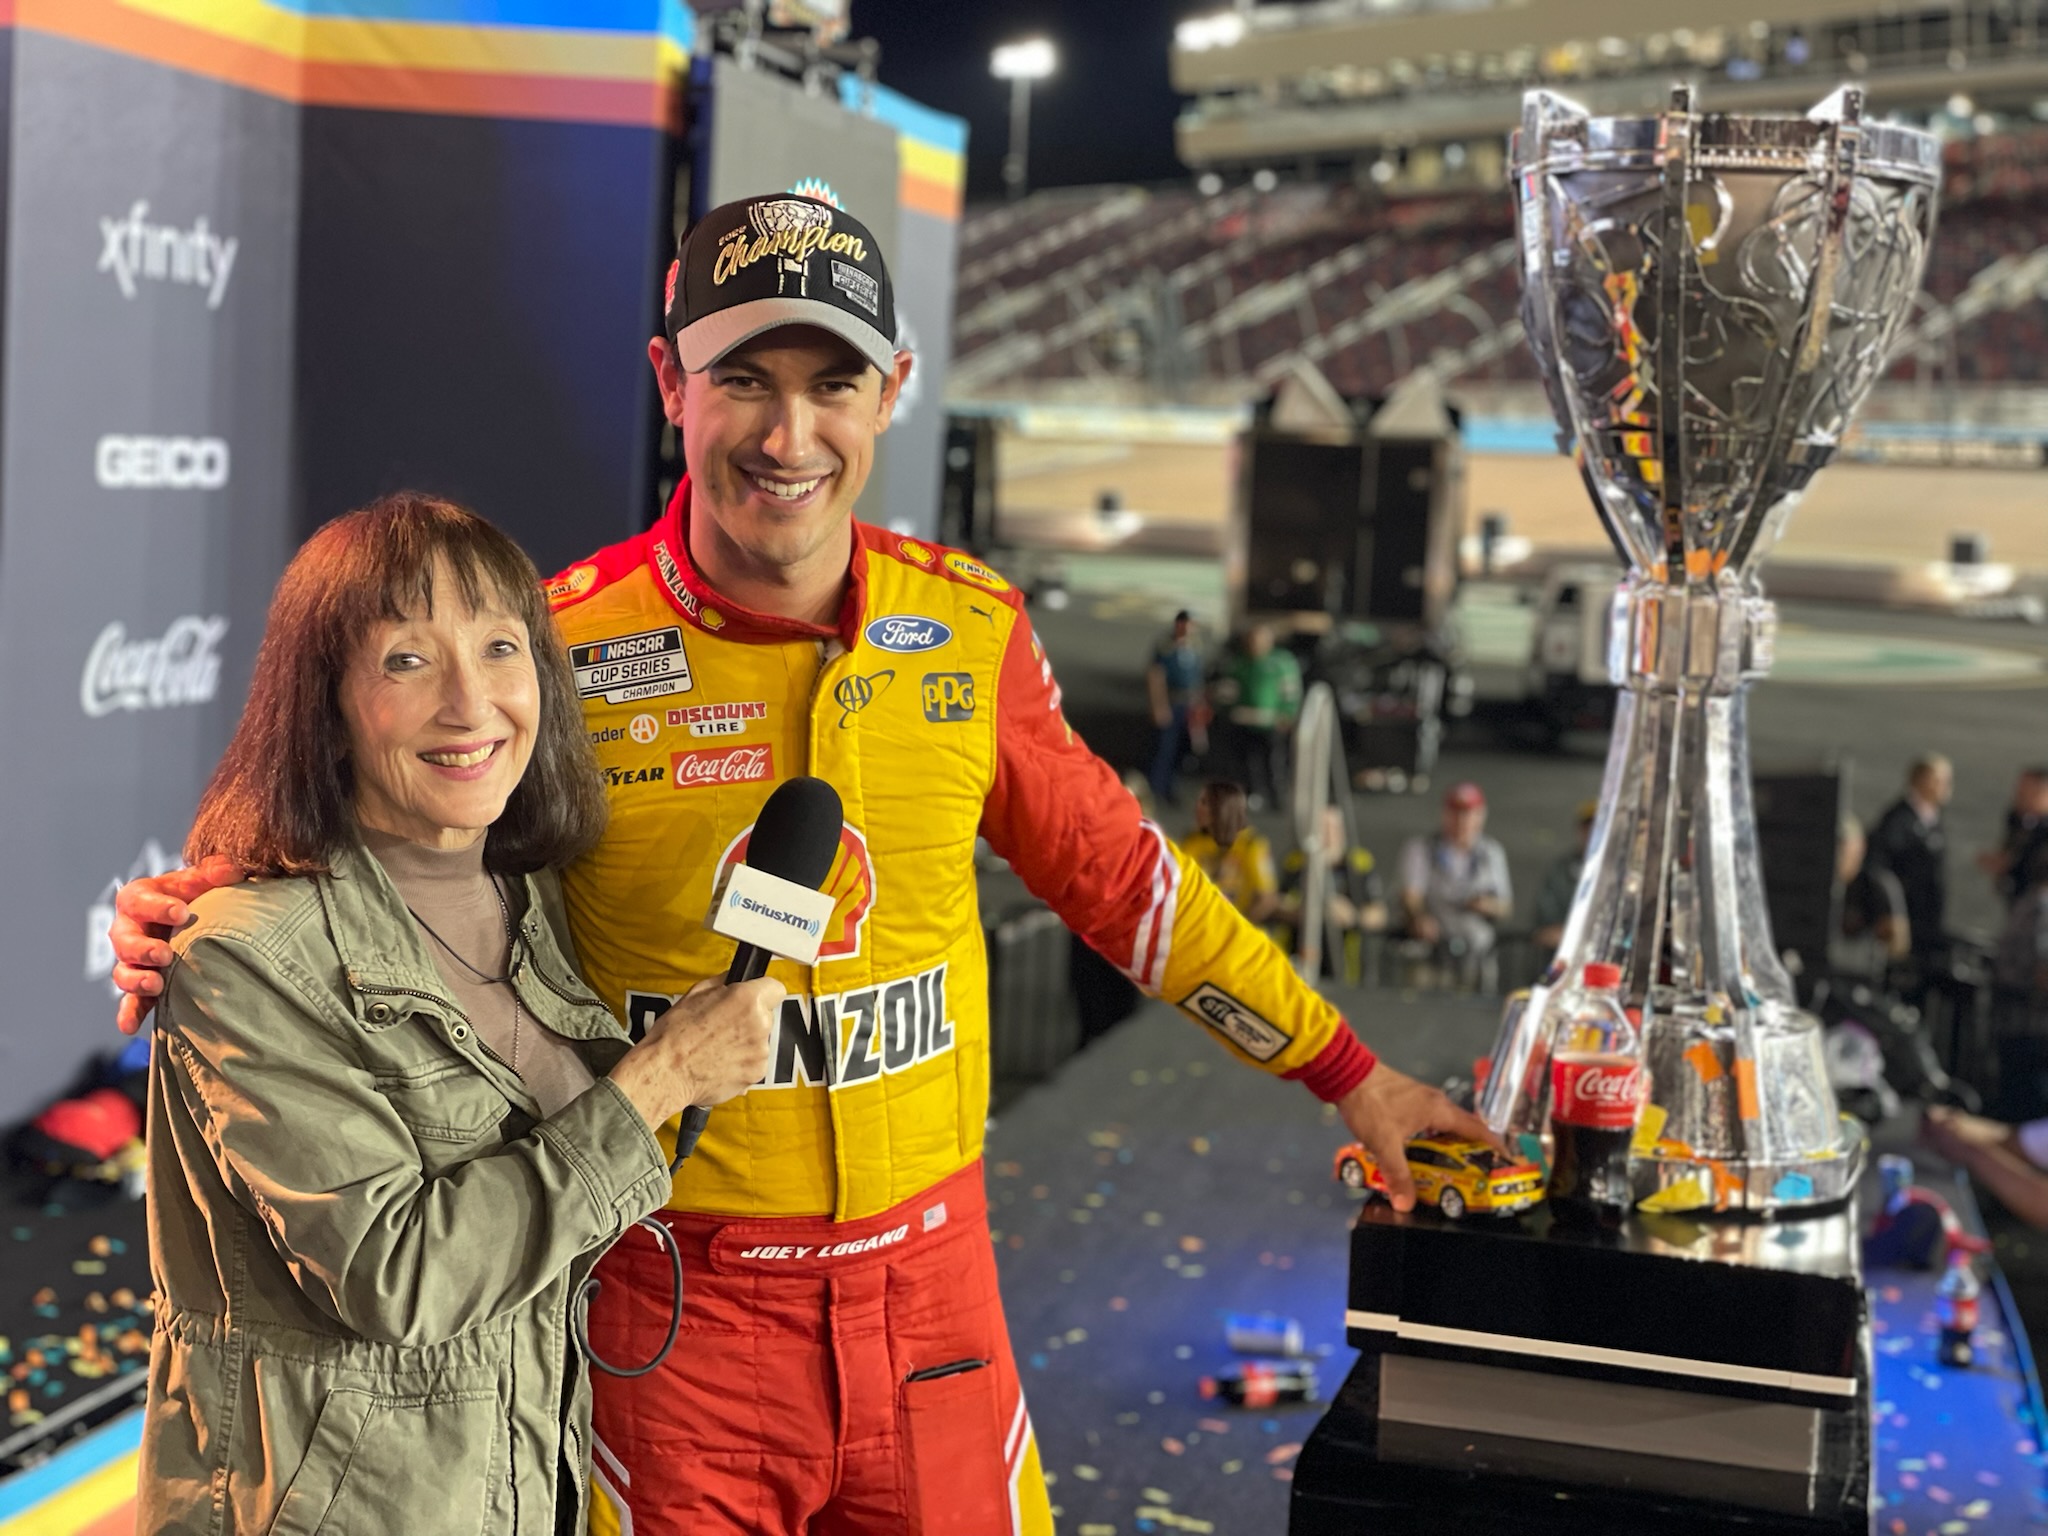 Claire B. Lang of Sirius XM NASCAR Radio Reveals Most Compelling Interviews in 2022 NASCAR Season, Including Some Emotional Behind-the-Scenes Moments